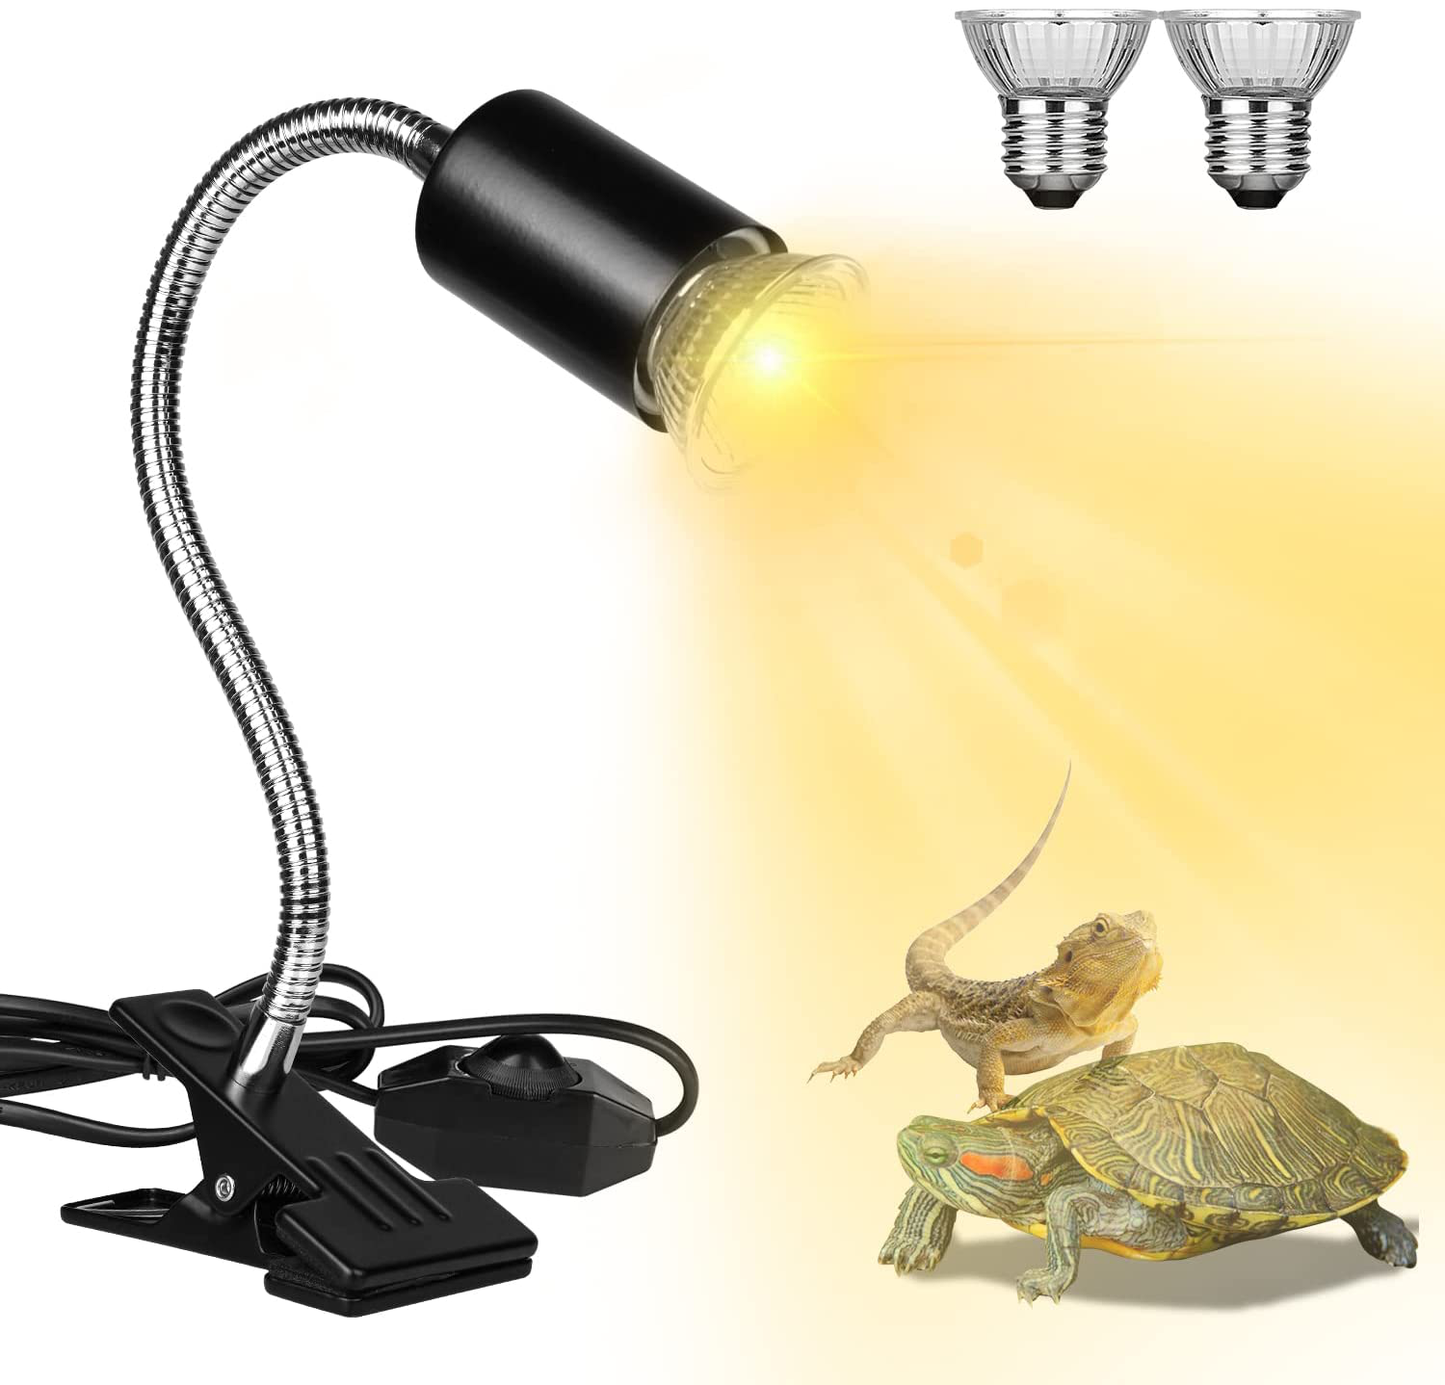 Reptile Heat Lamps, Turtle Lamp UVA/UVB Turtle Aquarium Tank Heating Lamps with Clamp, 360° Rotatable Basking Lamp for Lizard Turtle Snake Aquarium Aquatic Plants with 2 Heat Bulbs (E27,110V)